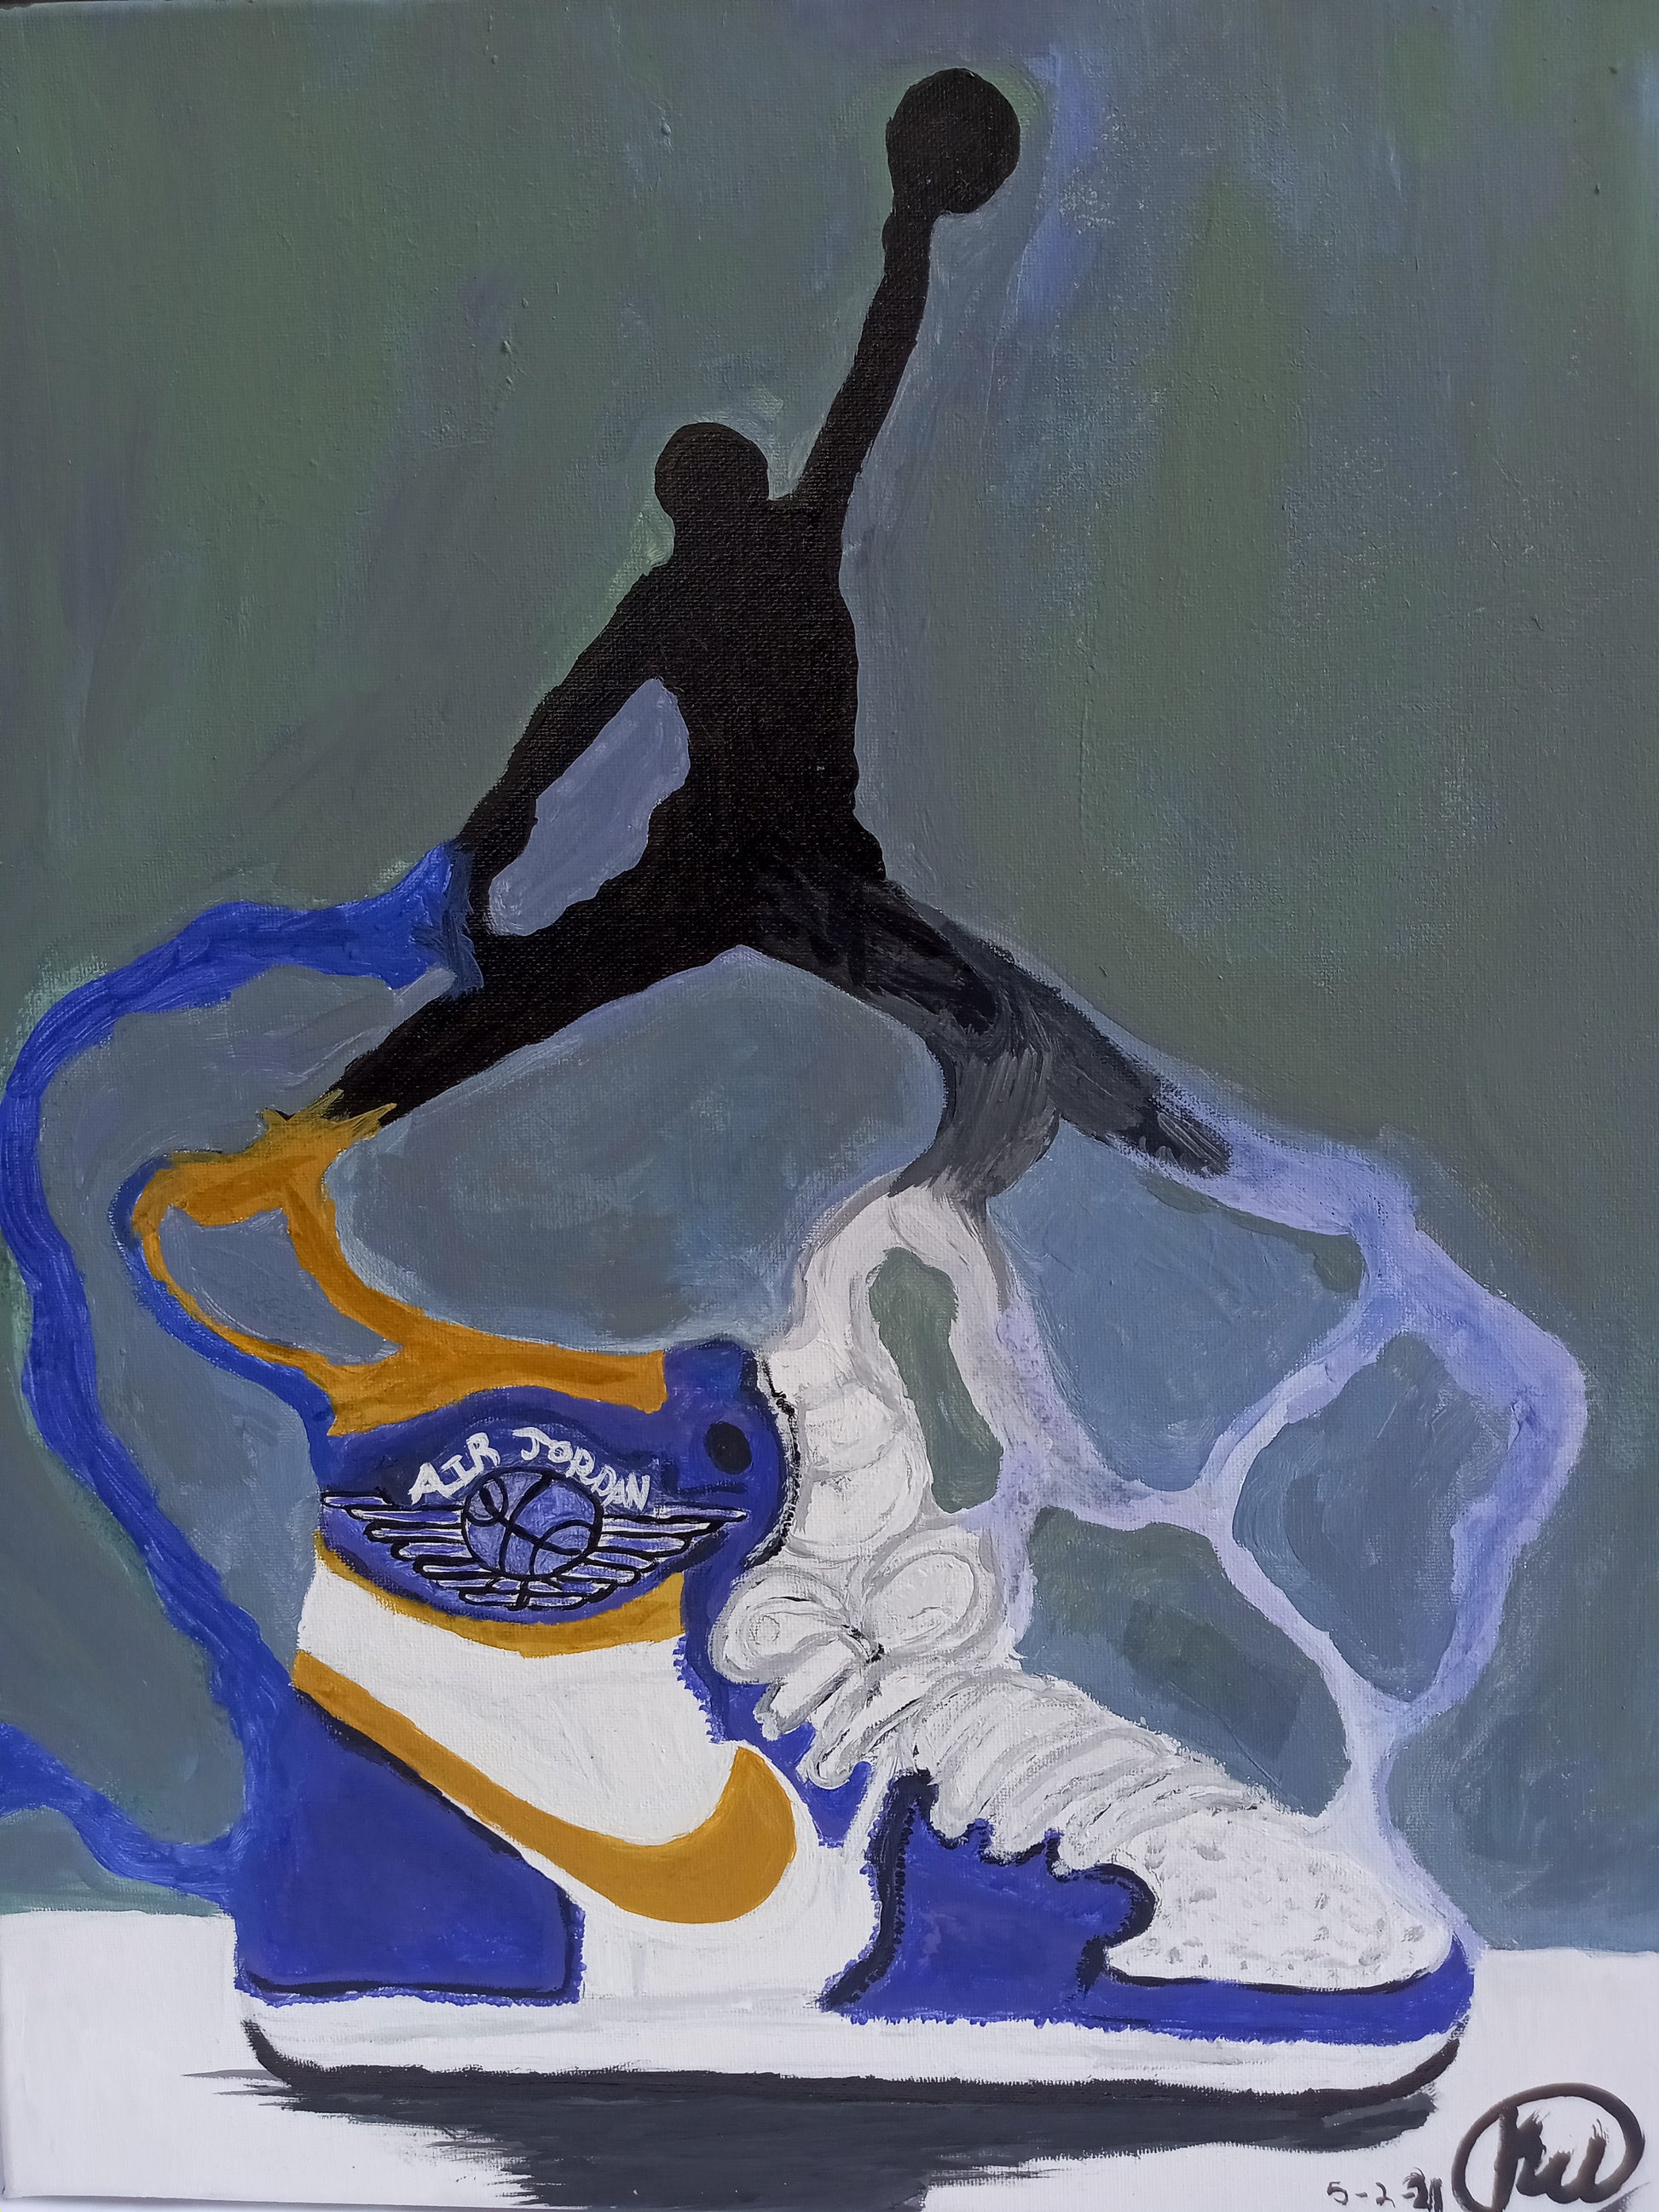 Painting of blur, white, and gold air jordan shoes with the air jordan jumpman logo above above the shoe. 